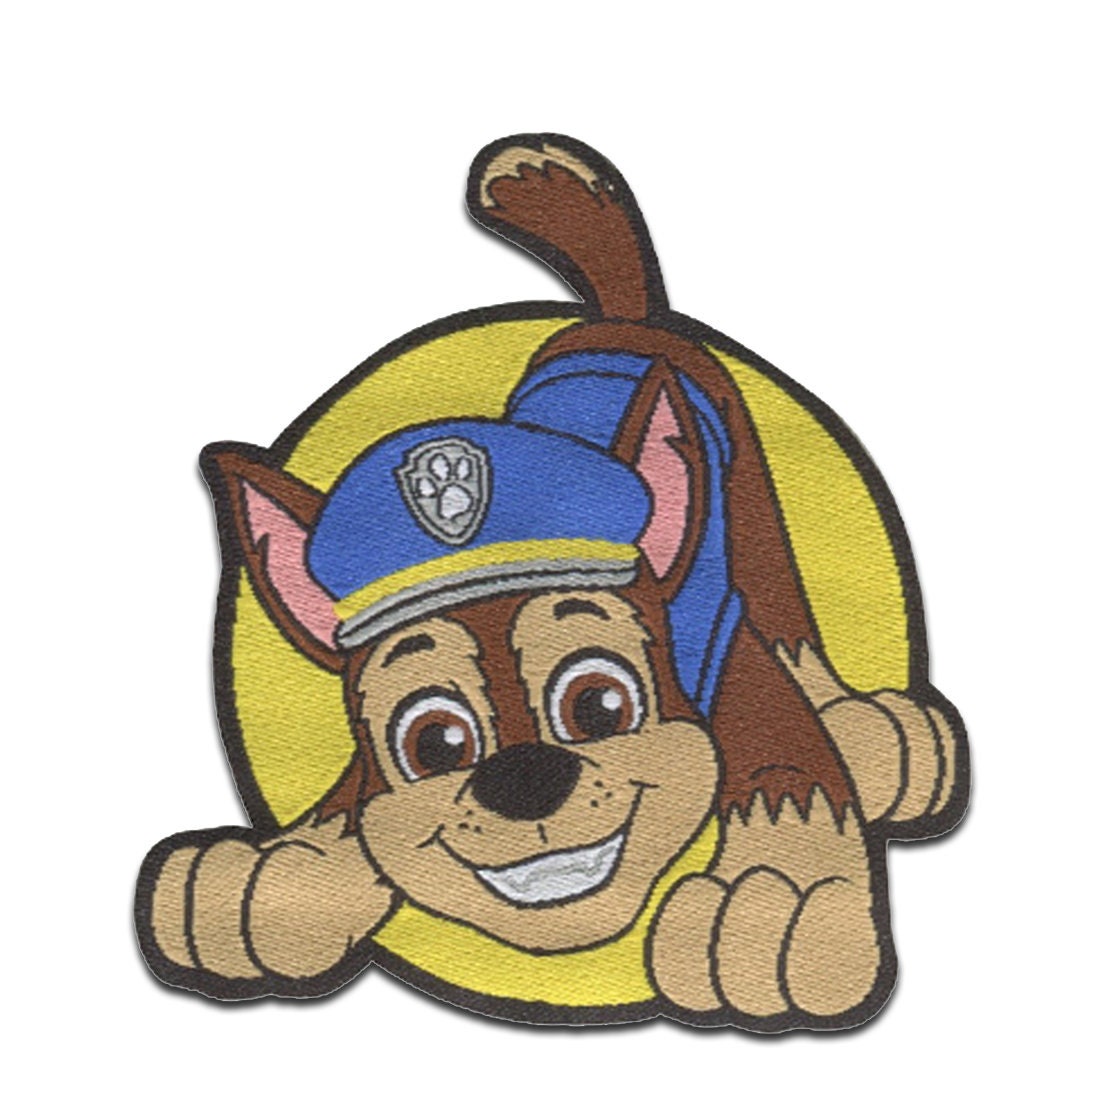 Paw Patrol © Chase Cool - Iron on patches adhesive, size: 2,63 x 2